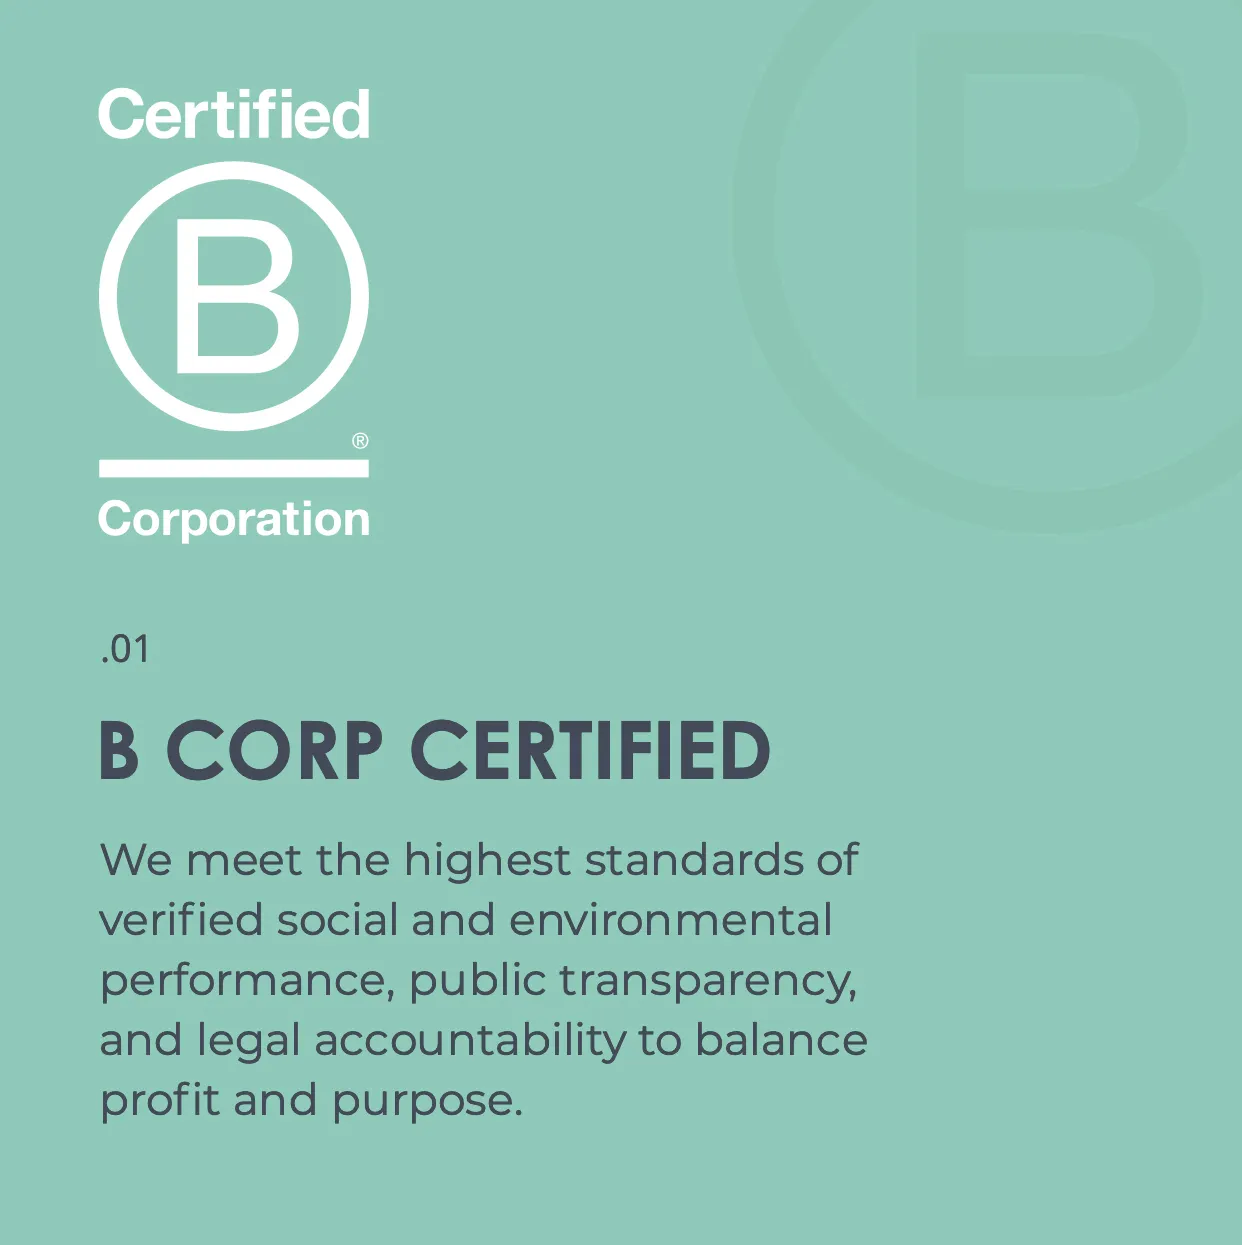 background image with B-CORP certified logo and copy = 